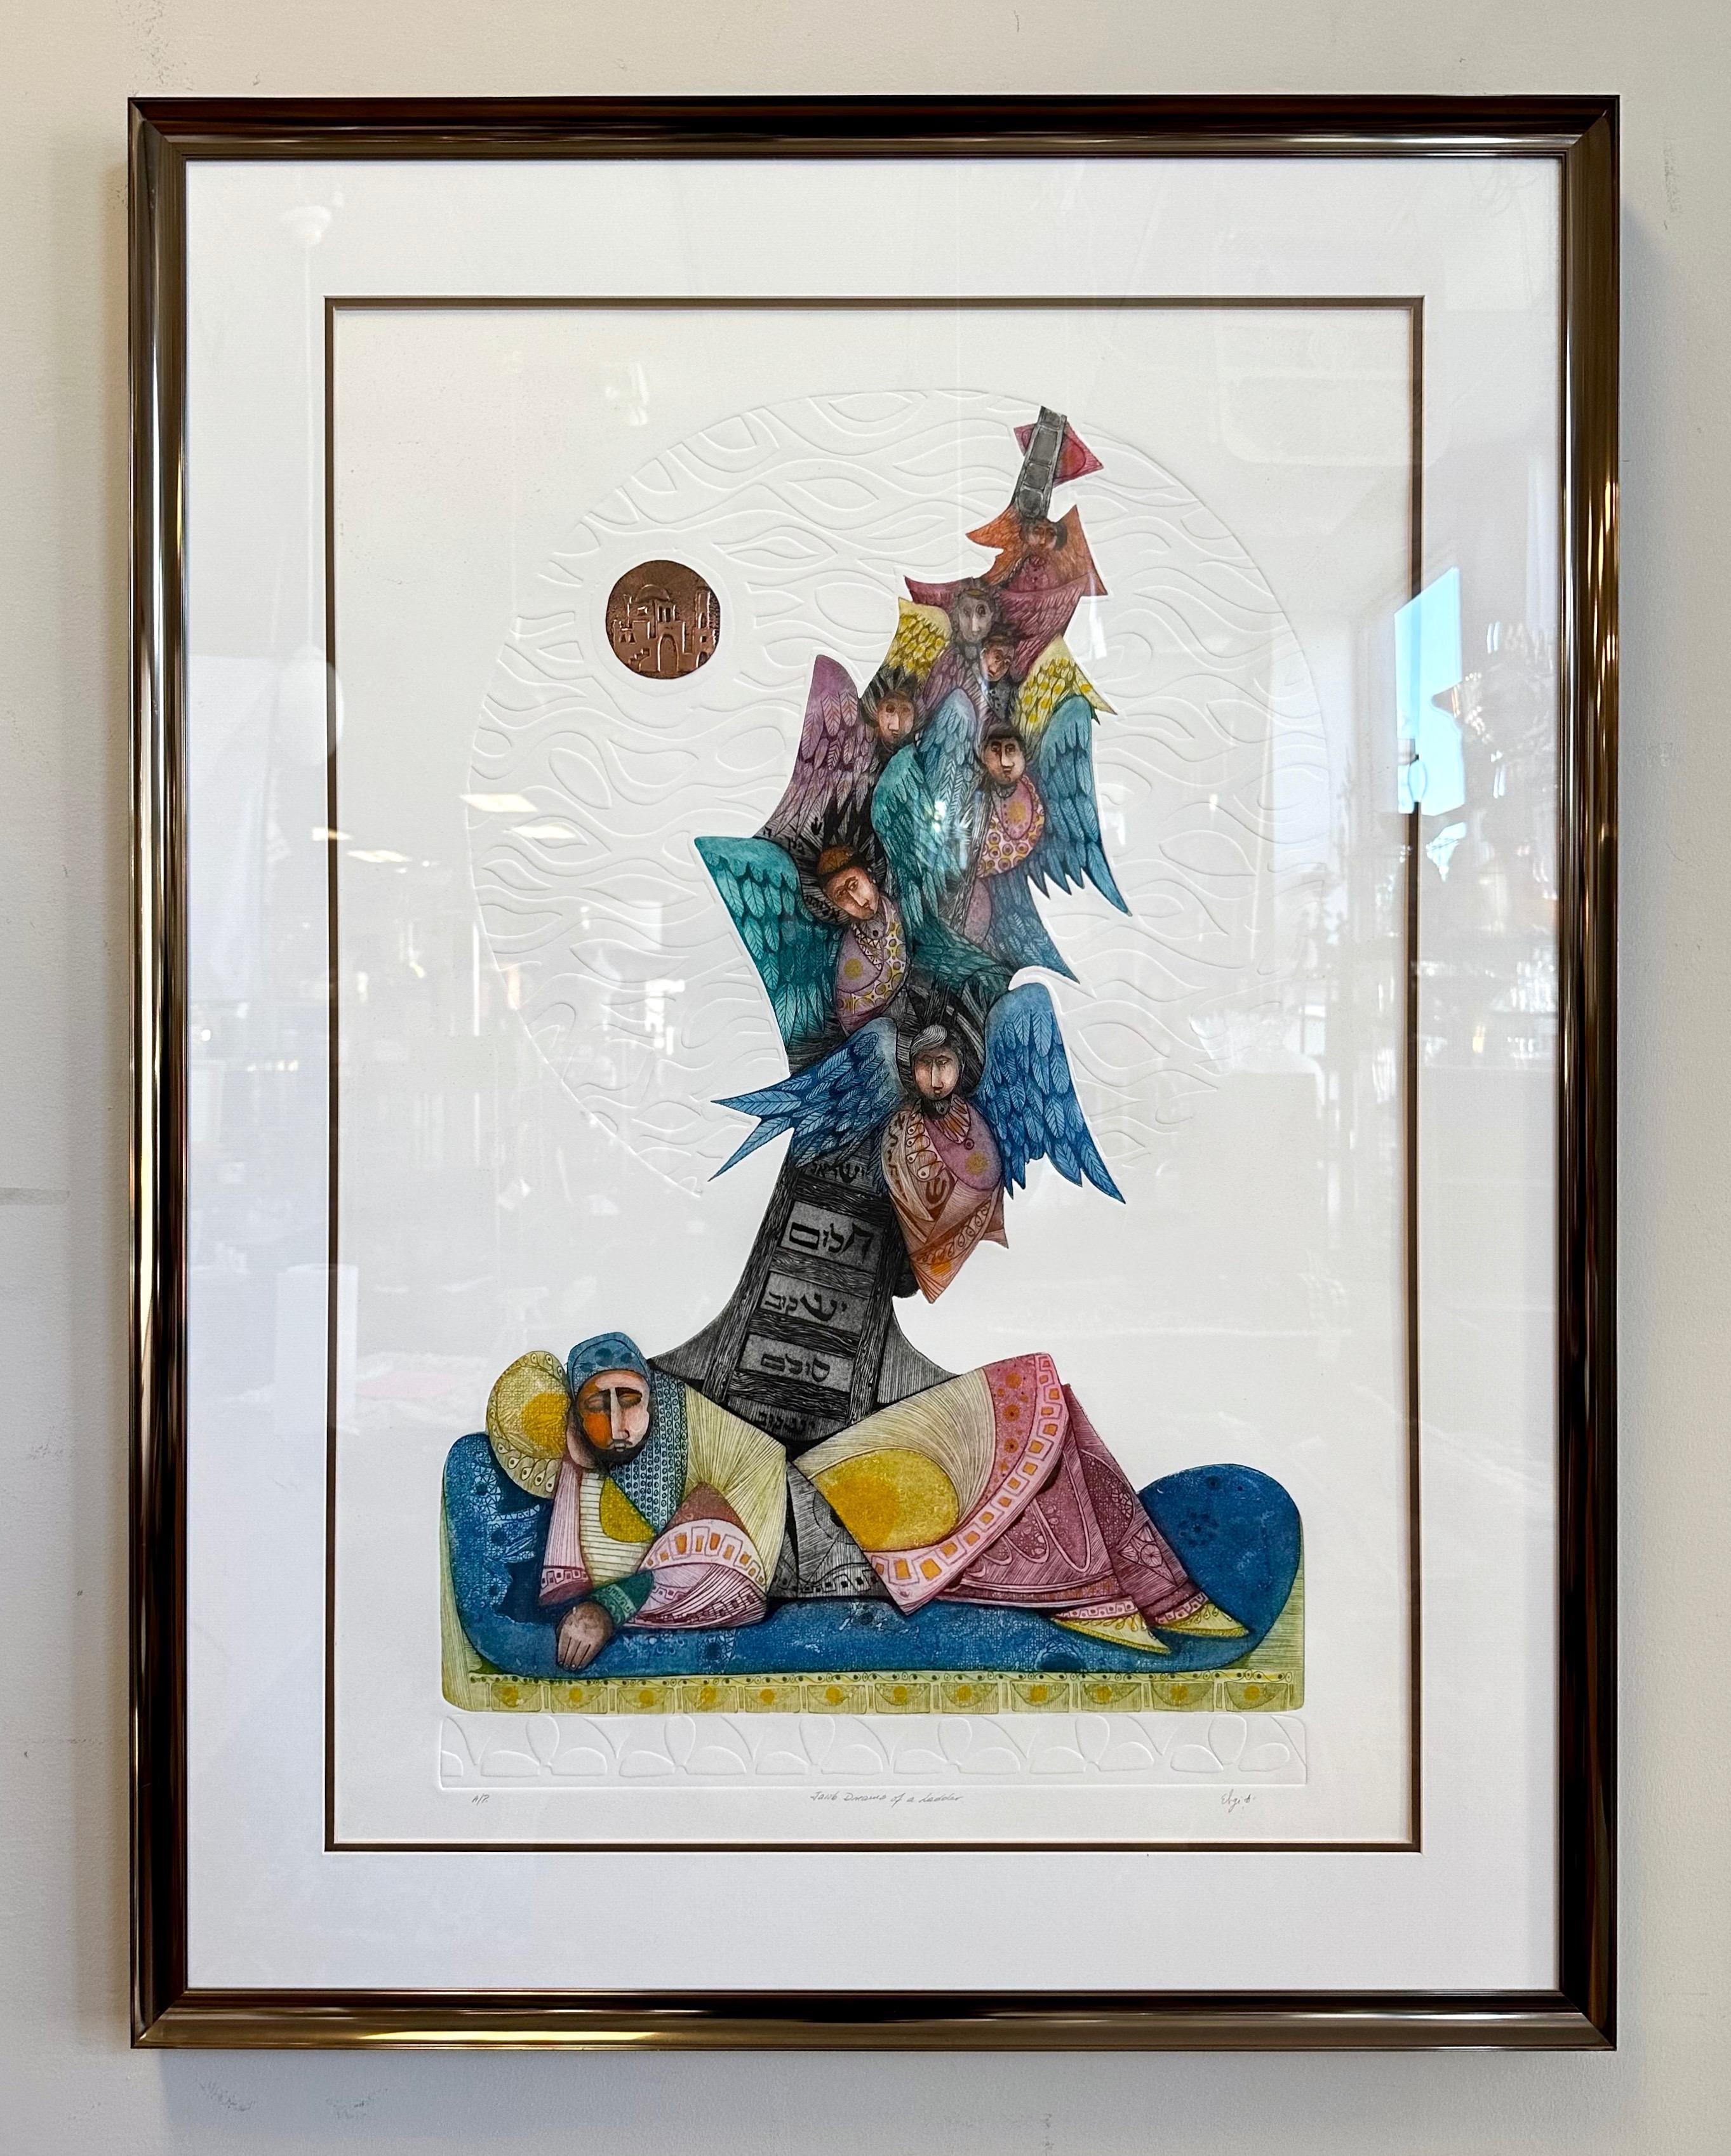 A large, colorful, and exceptionally well executed Judaica-themed intaglio print on embossed paper with embossed copper foil inset titled “Jacob Dreams of a Ladder” by noted Morocco-born Jewish American artist Amram Ebgi (b. 1939).

Signed and